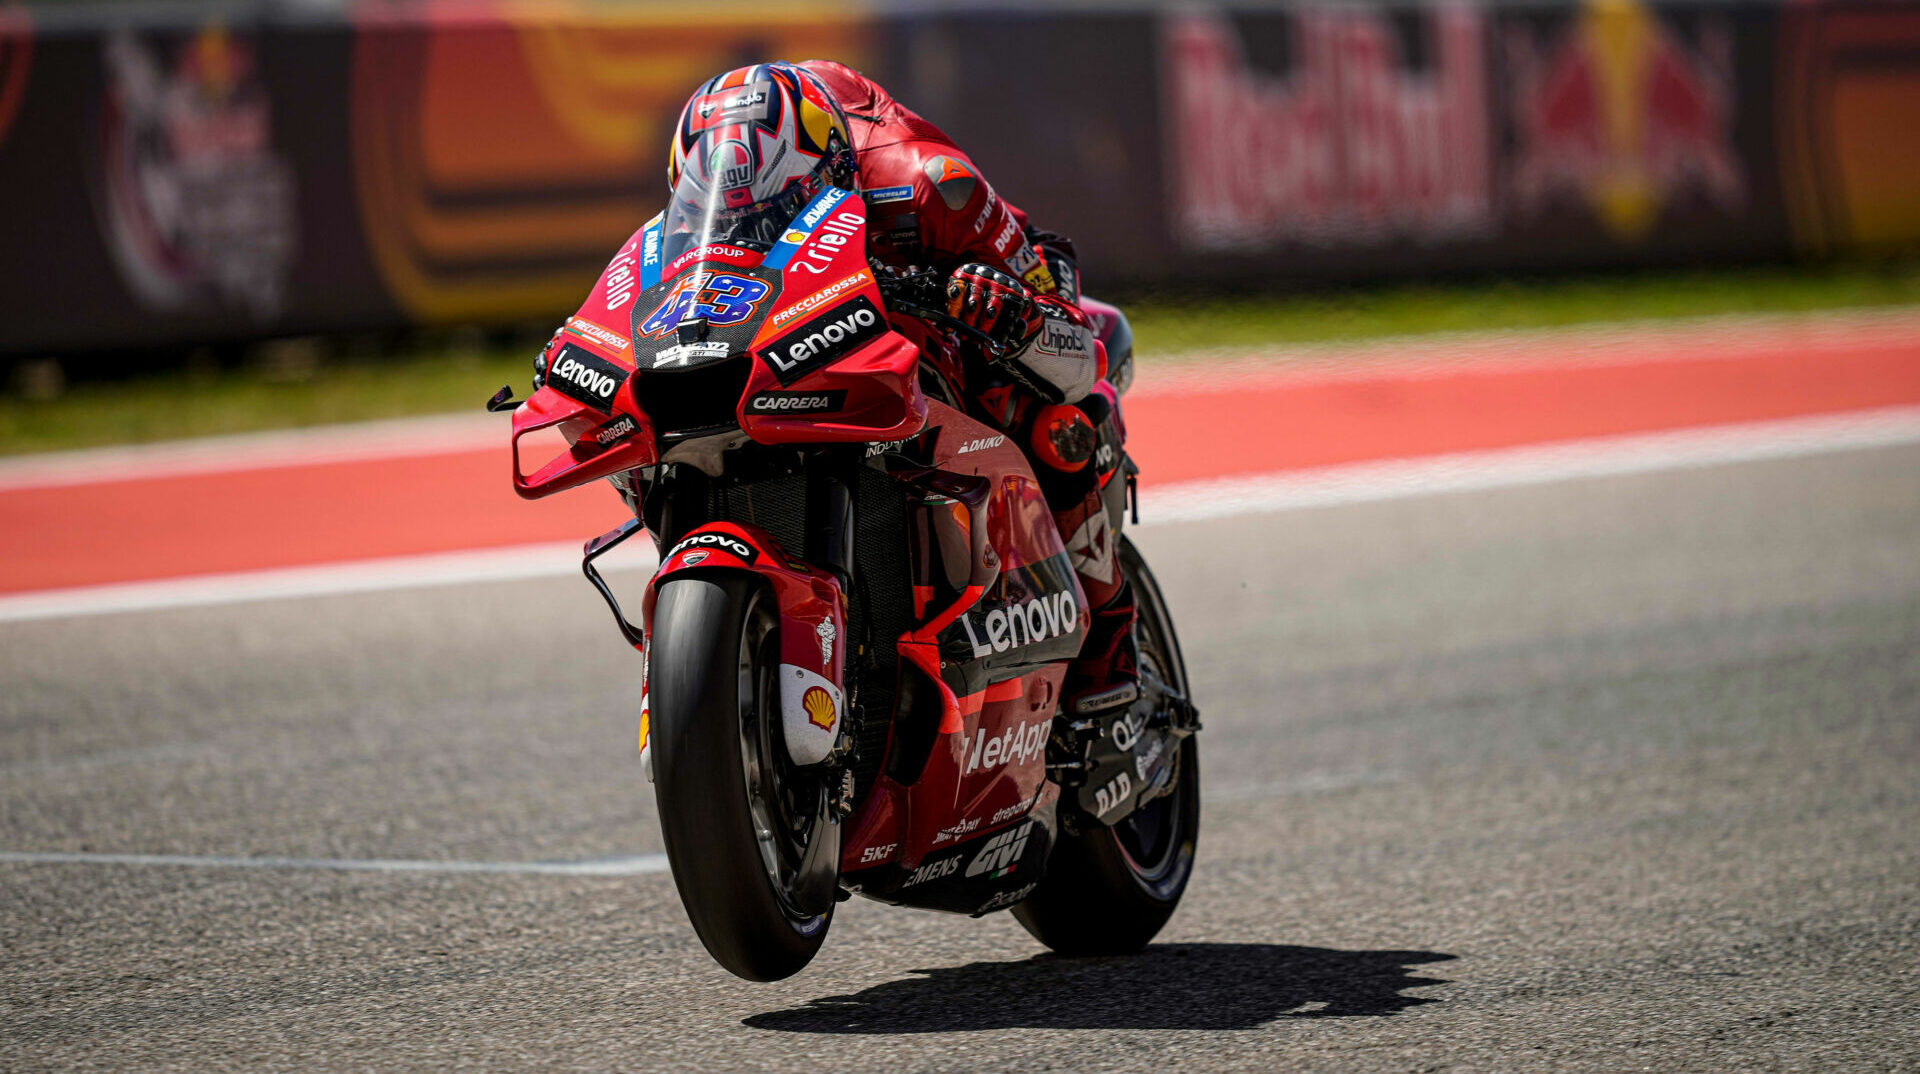 Jack Miller (43) in action at COTA. Photo courtesy Ducati.